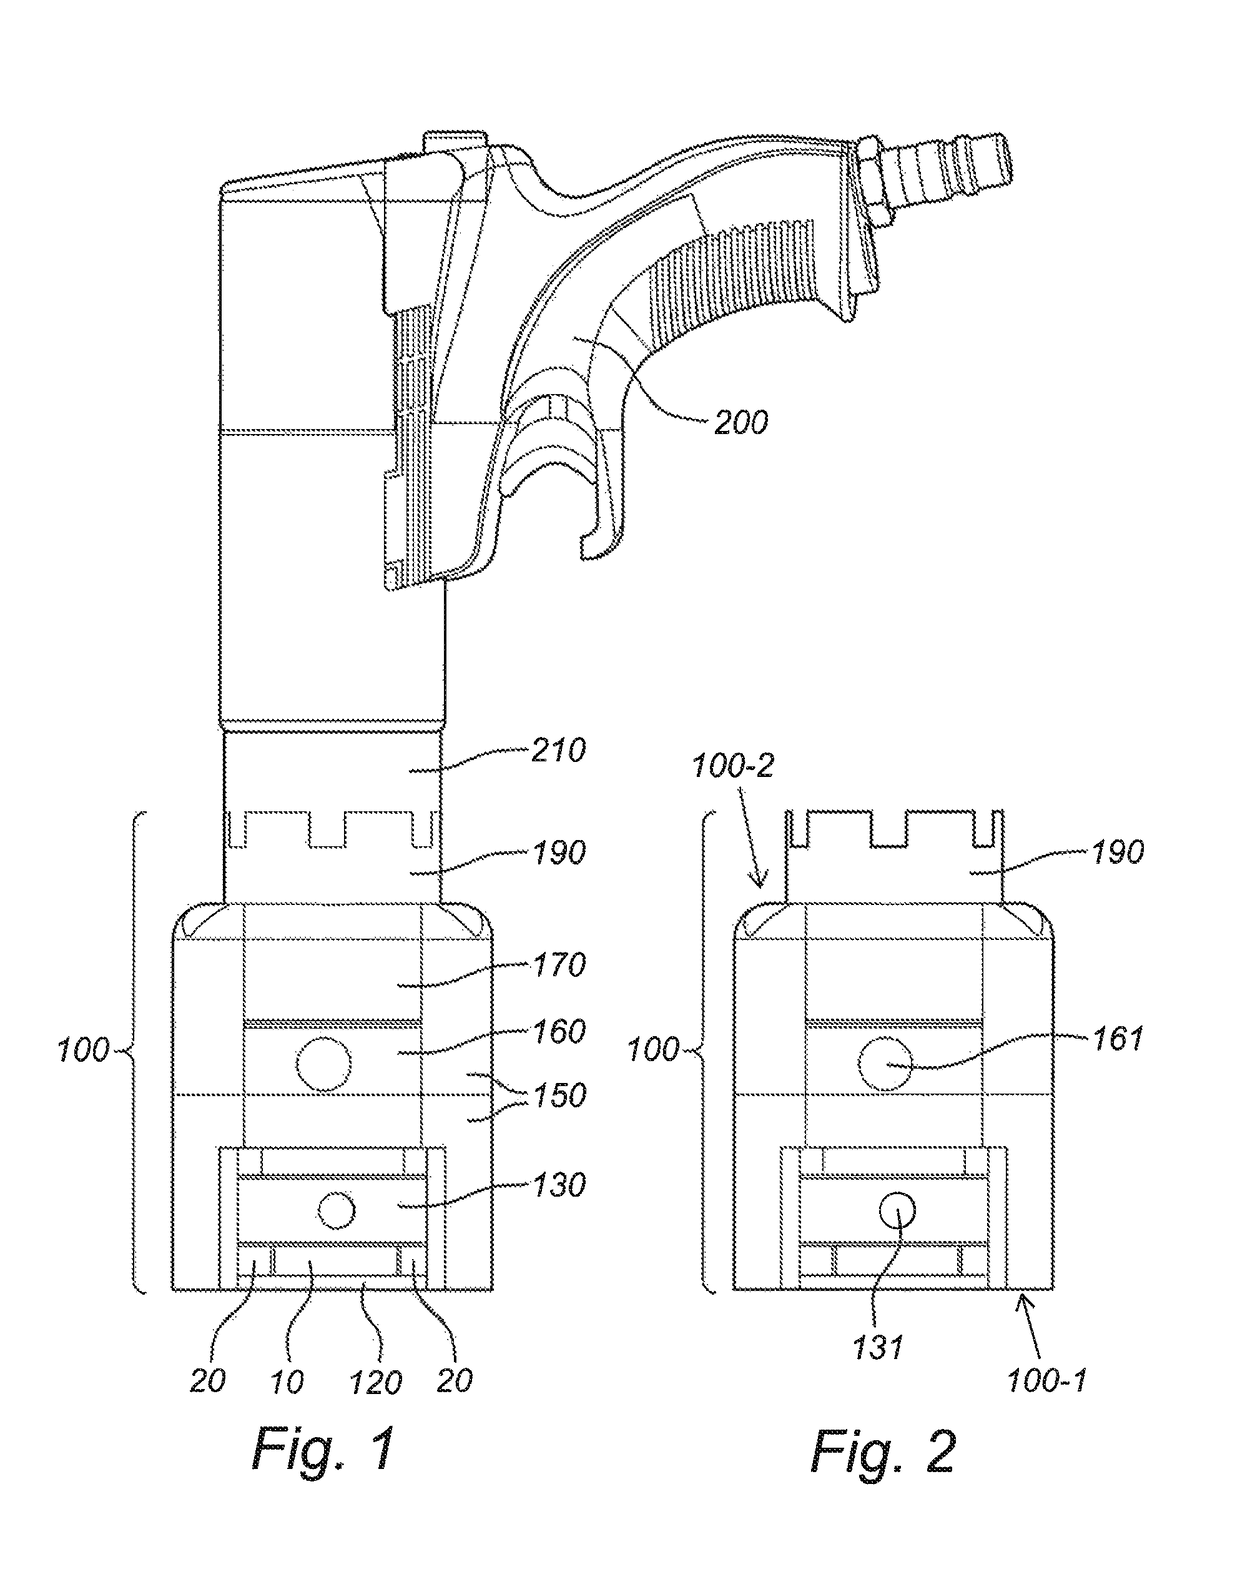 Interface device for tensioning a nut and a bolt assembly